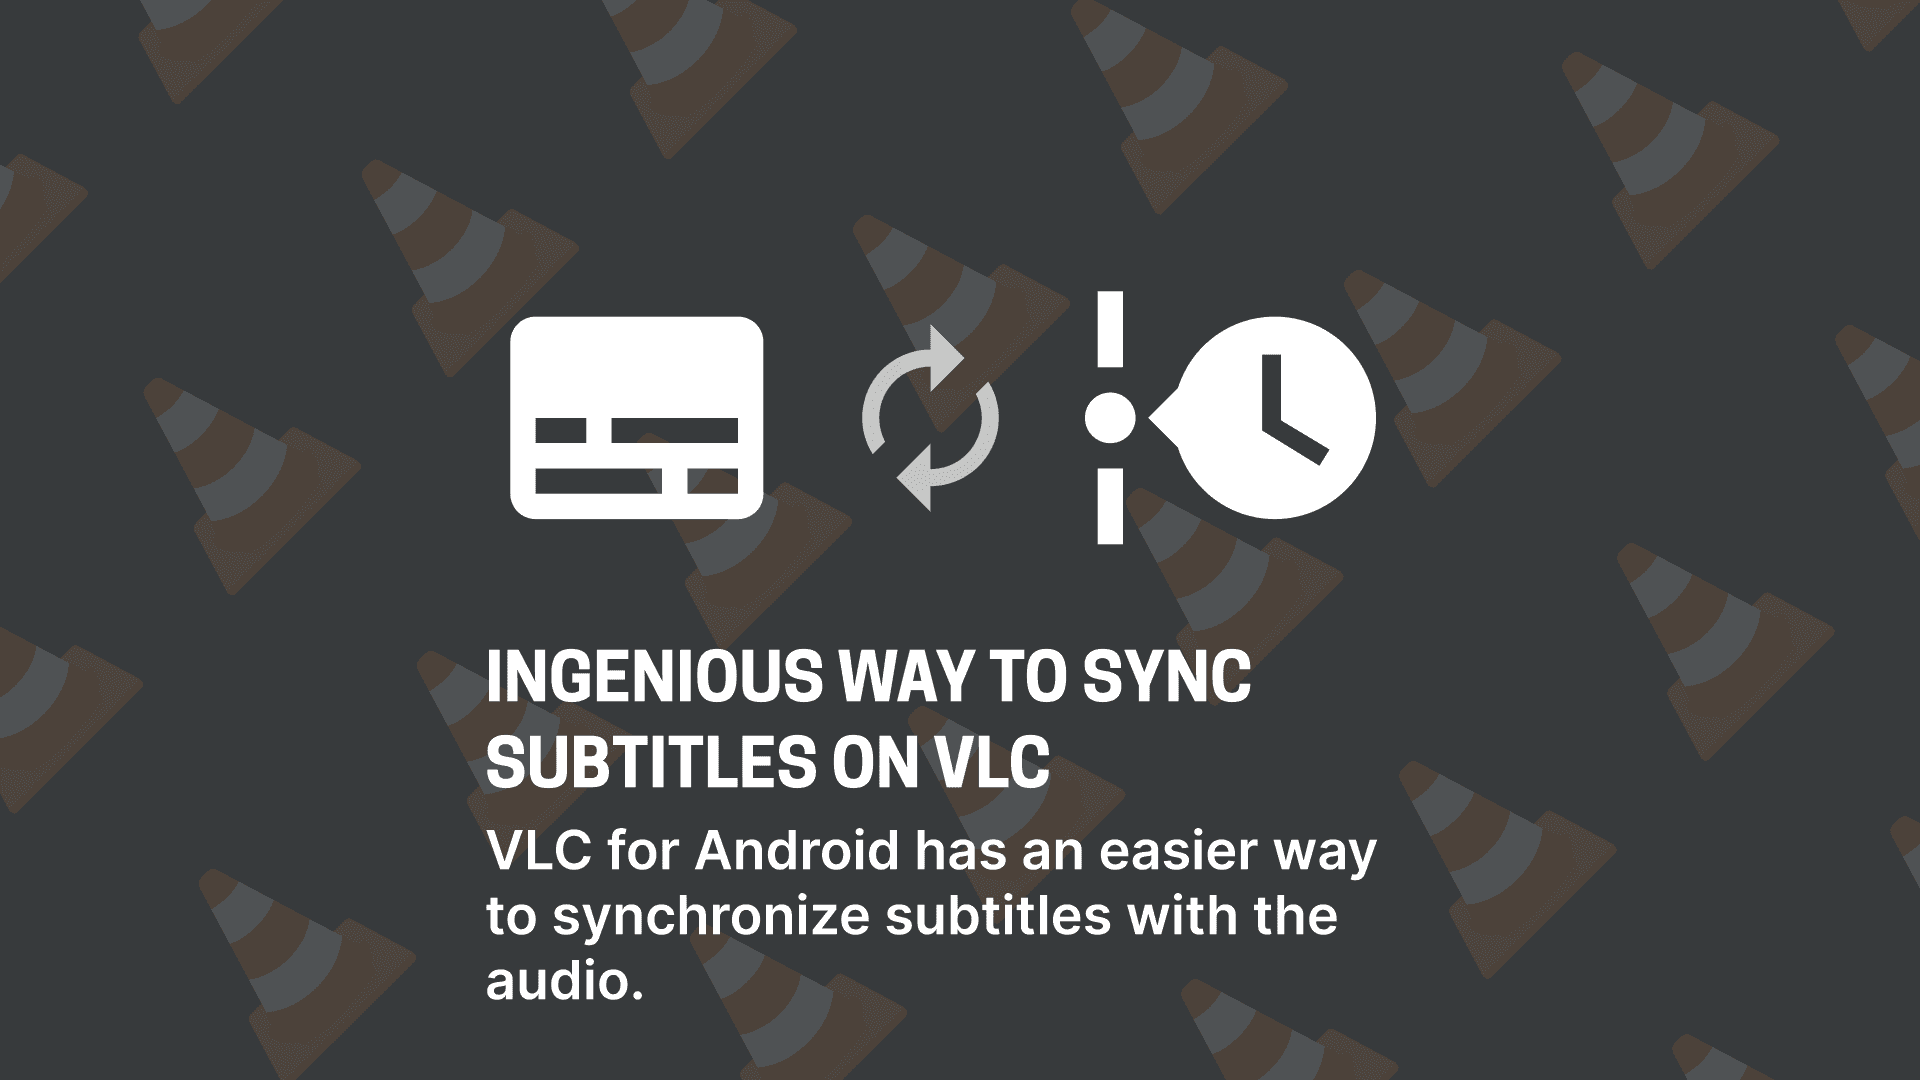 Cover Image for the post The ingenious new sync subtitles feature on VLC for Android.